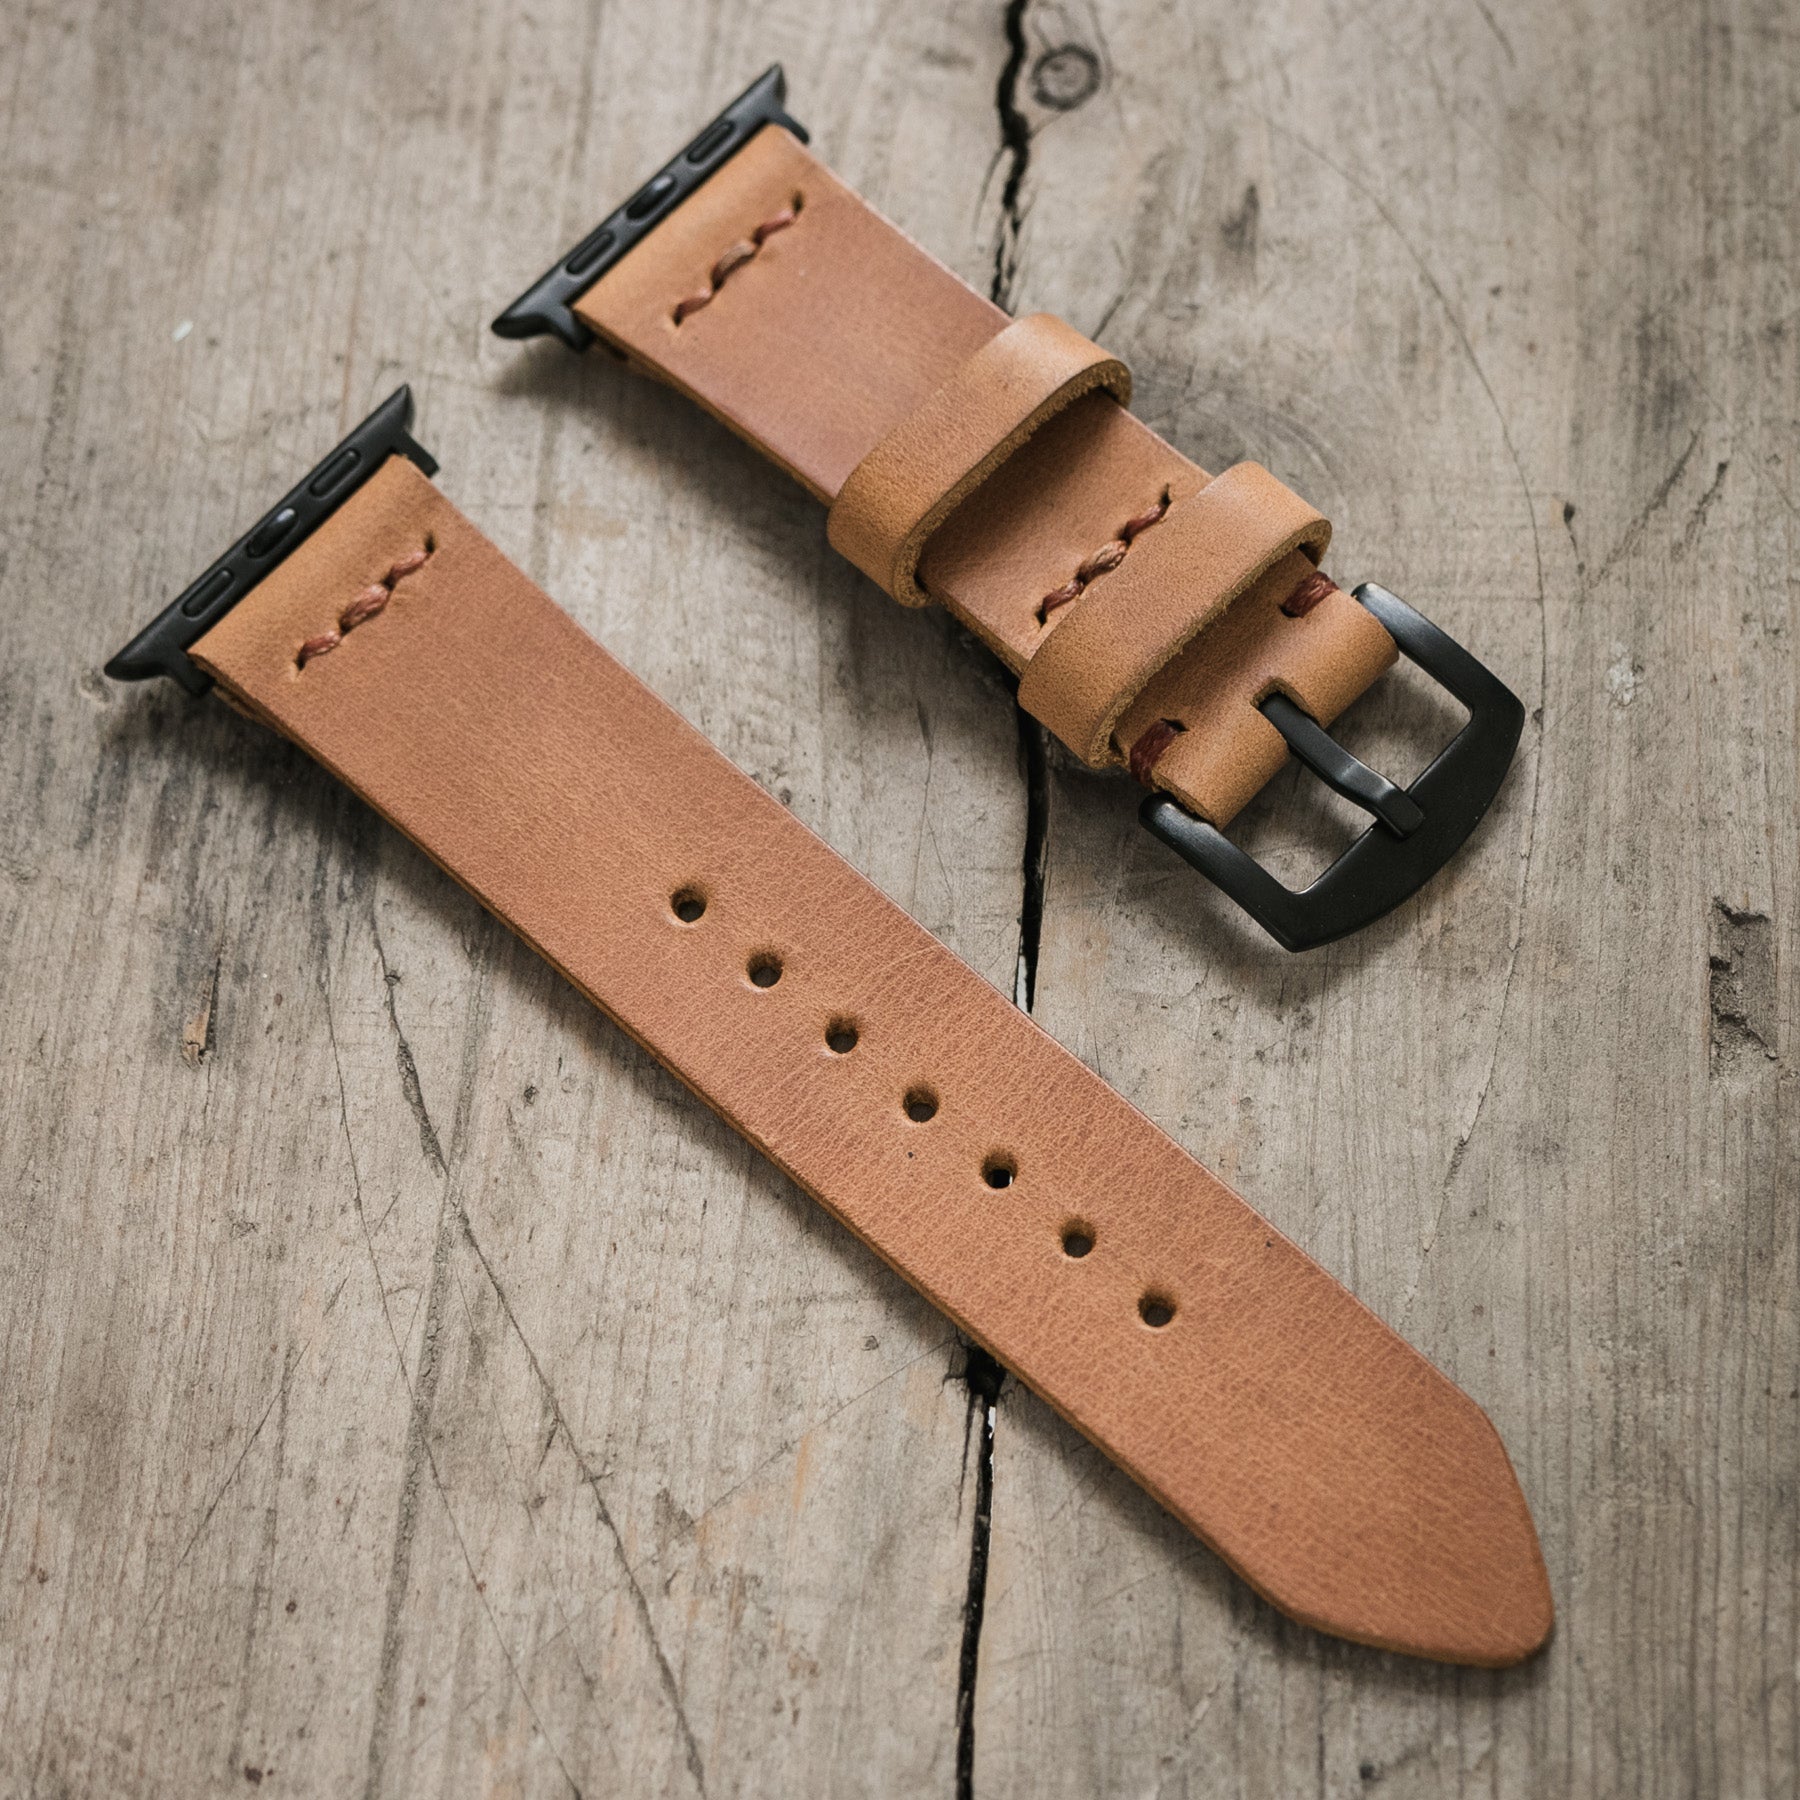  Mustard Apple Watch Leather Band